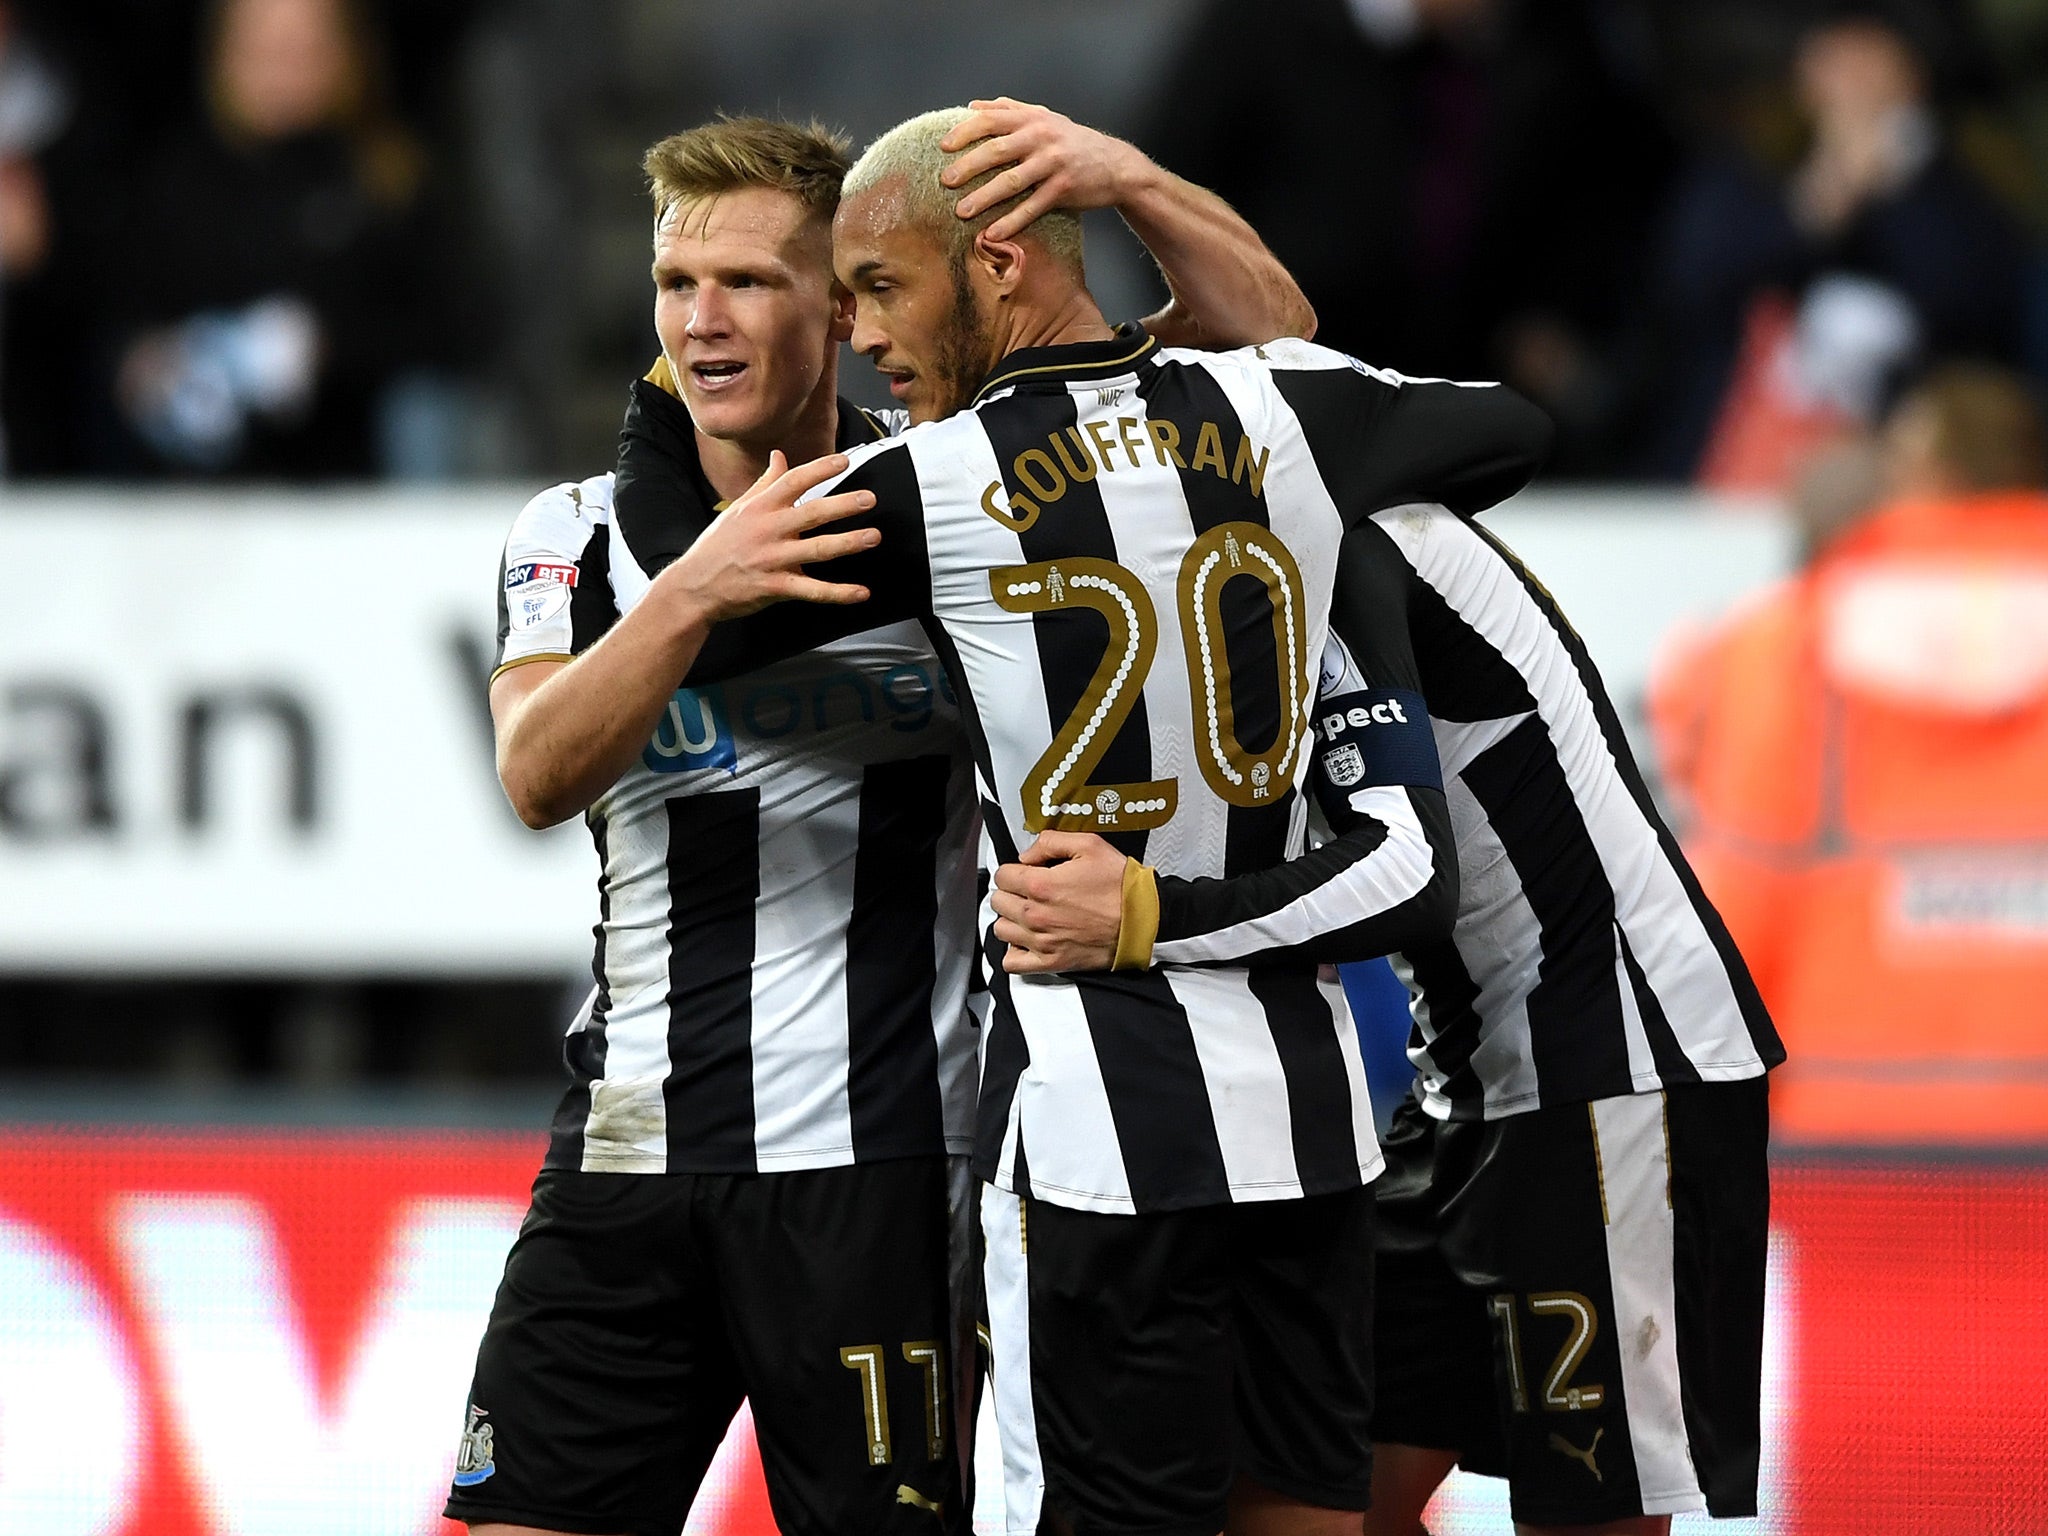 Ritchie's late strike sealed Newcastle's progression to the fourth round for the first time since 2012